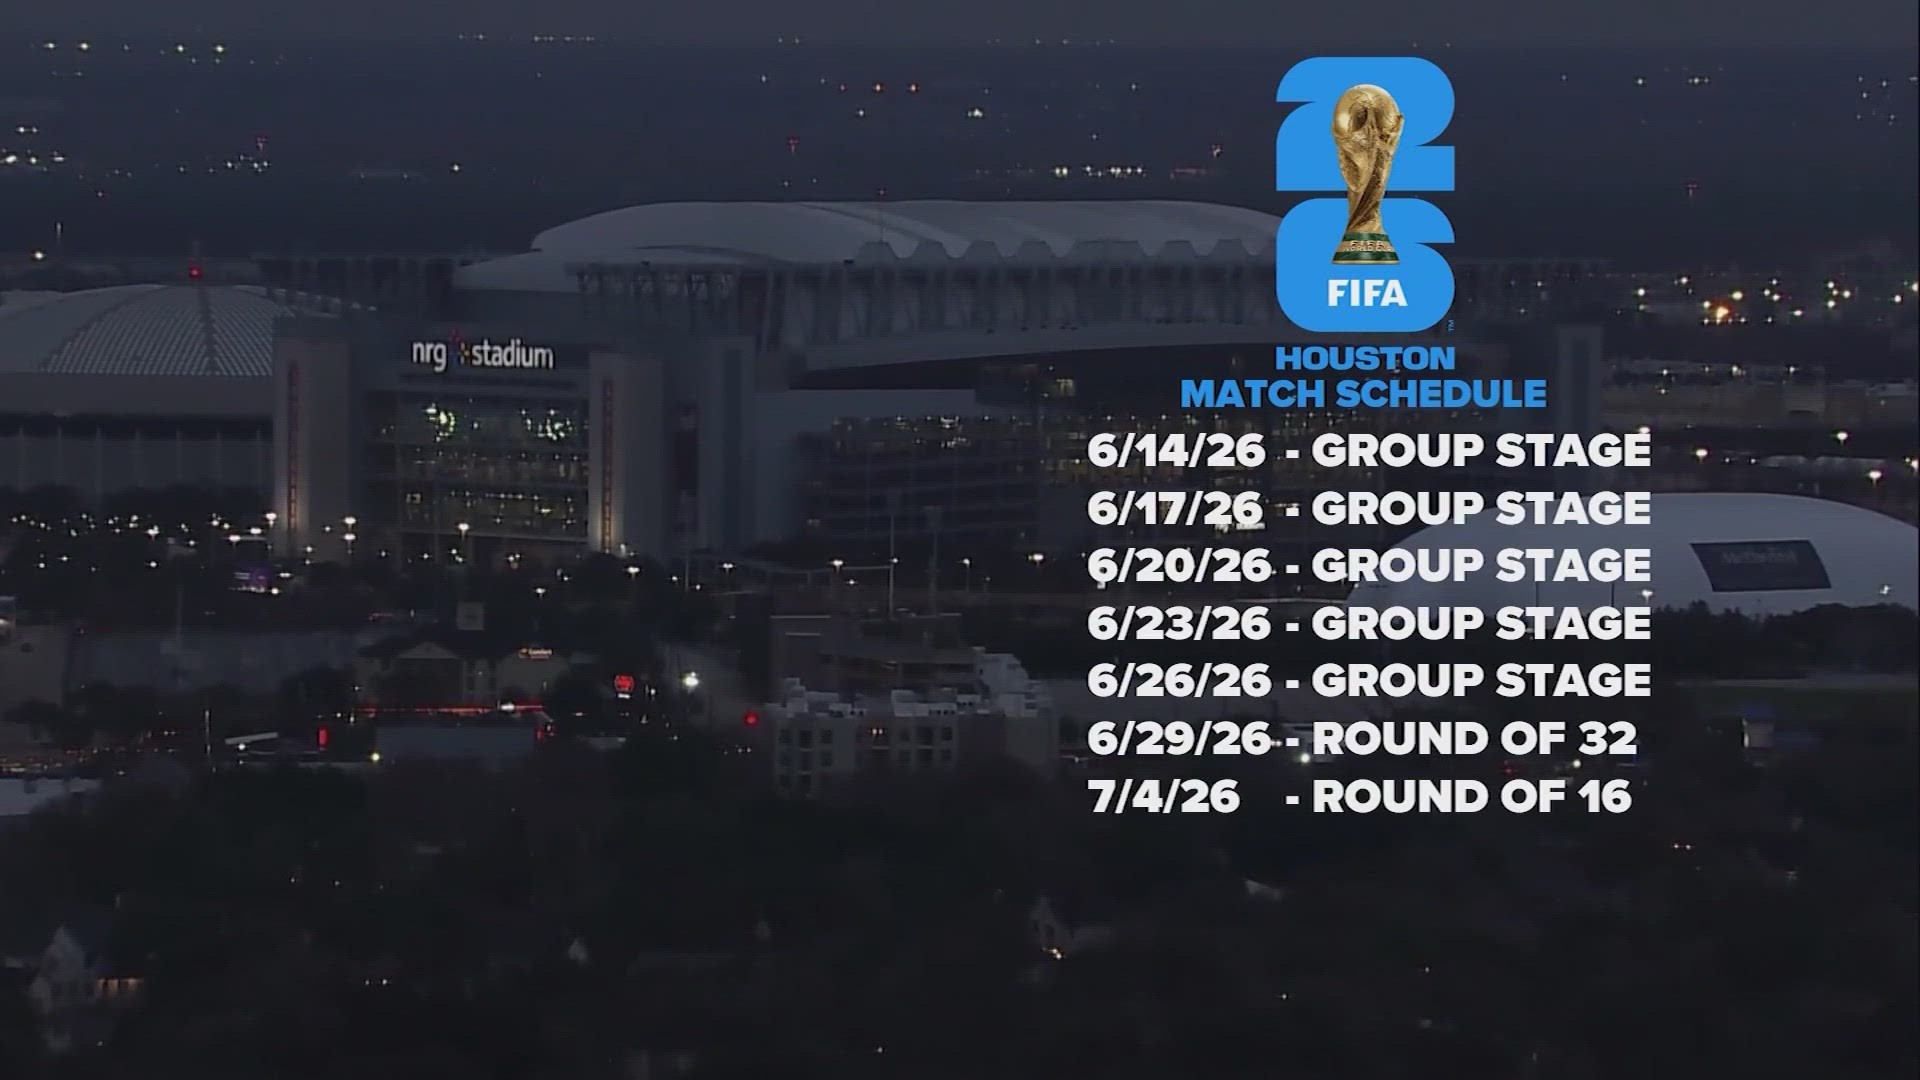 Between Houston and Dallas, Texas will host 16 World Cup matches.